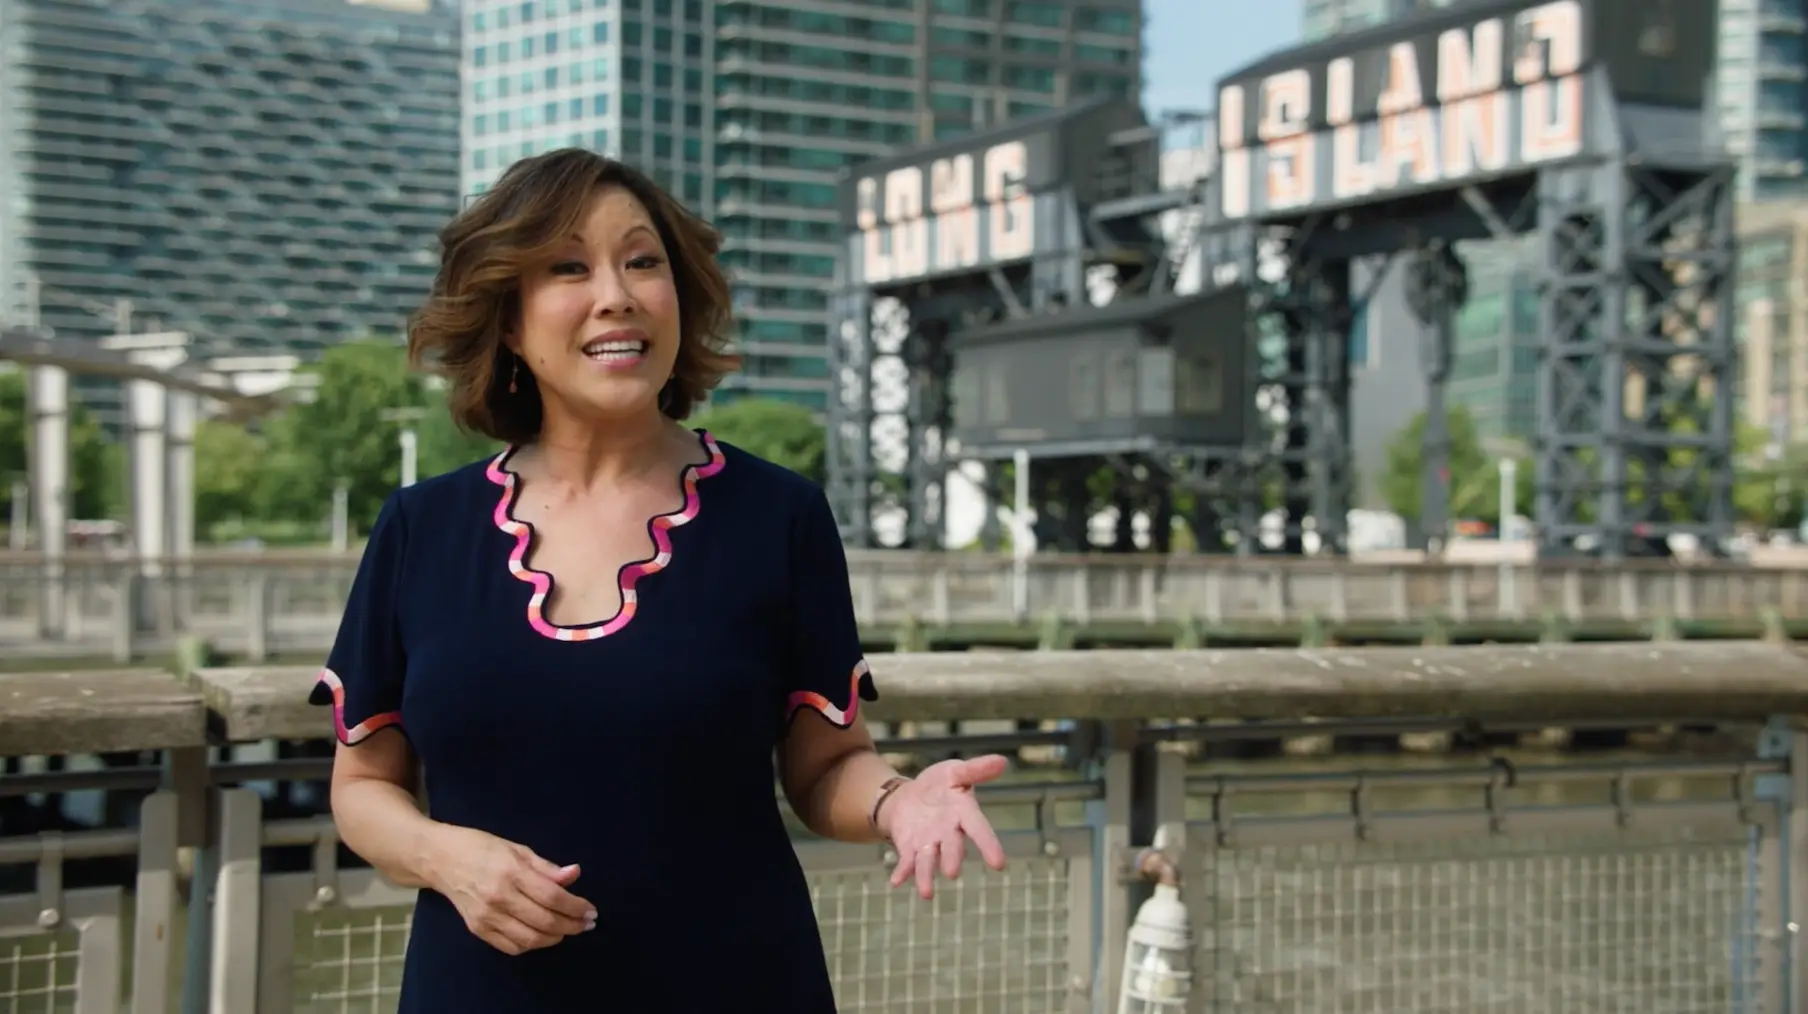 A woman in a blue dress standing in front of a city for the CBS News NY brand campaign.